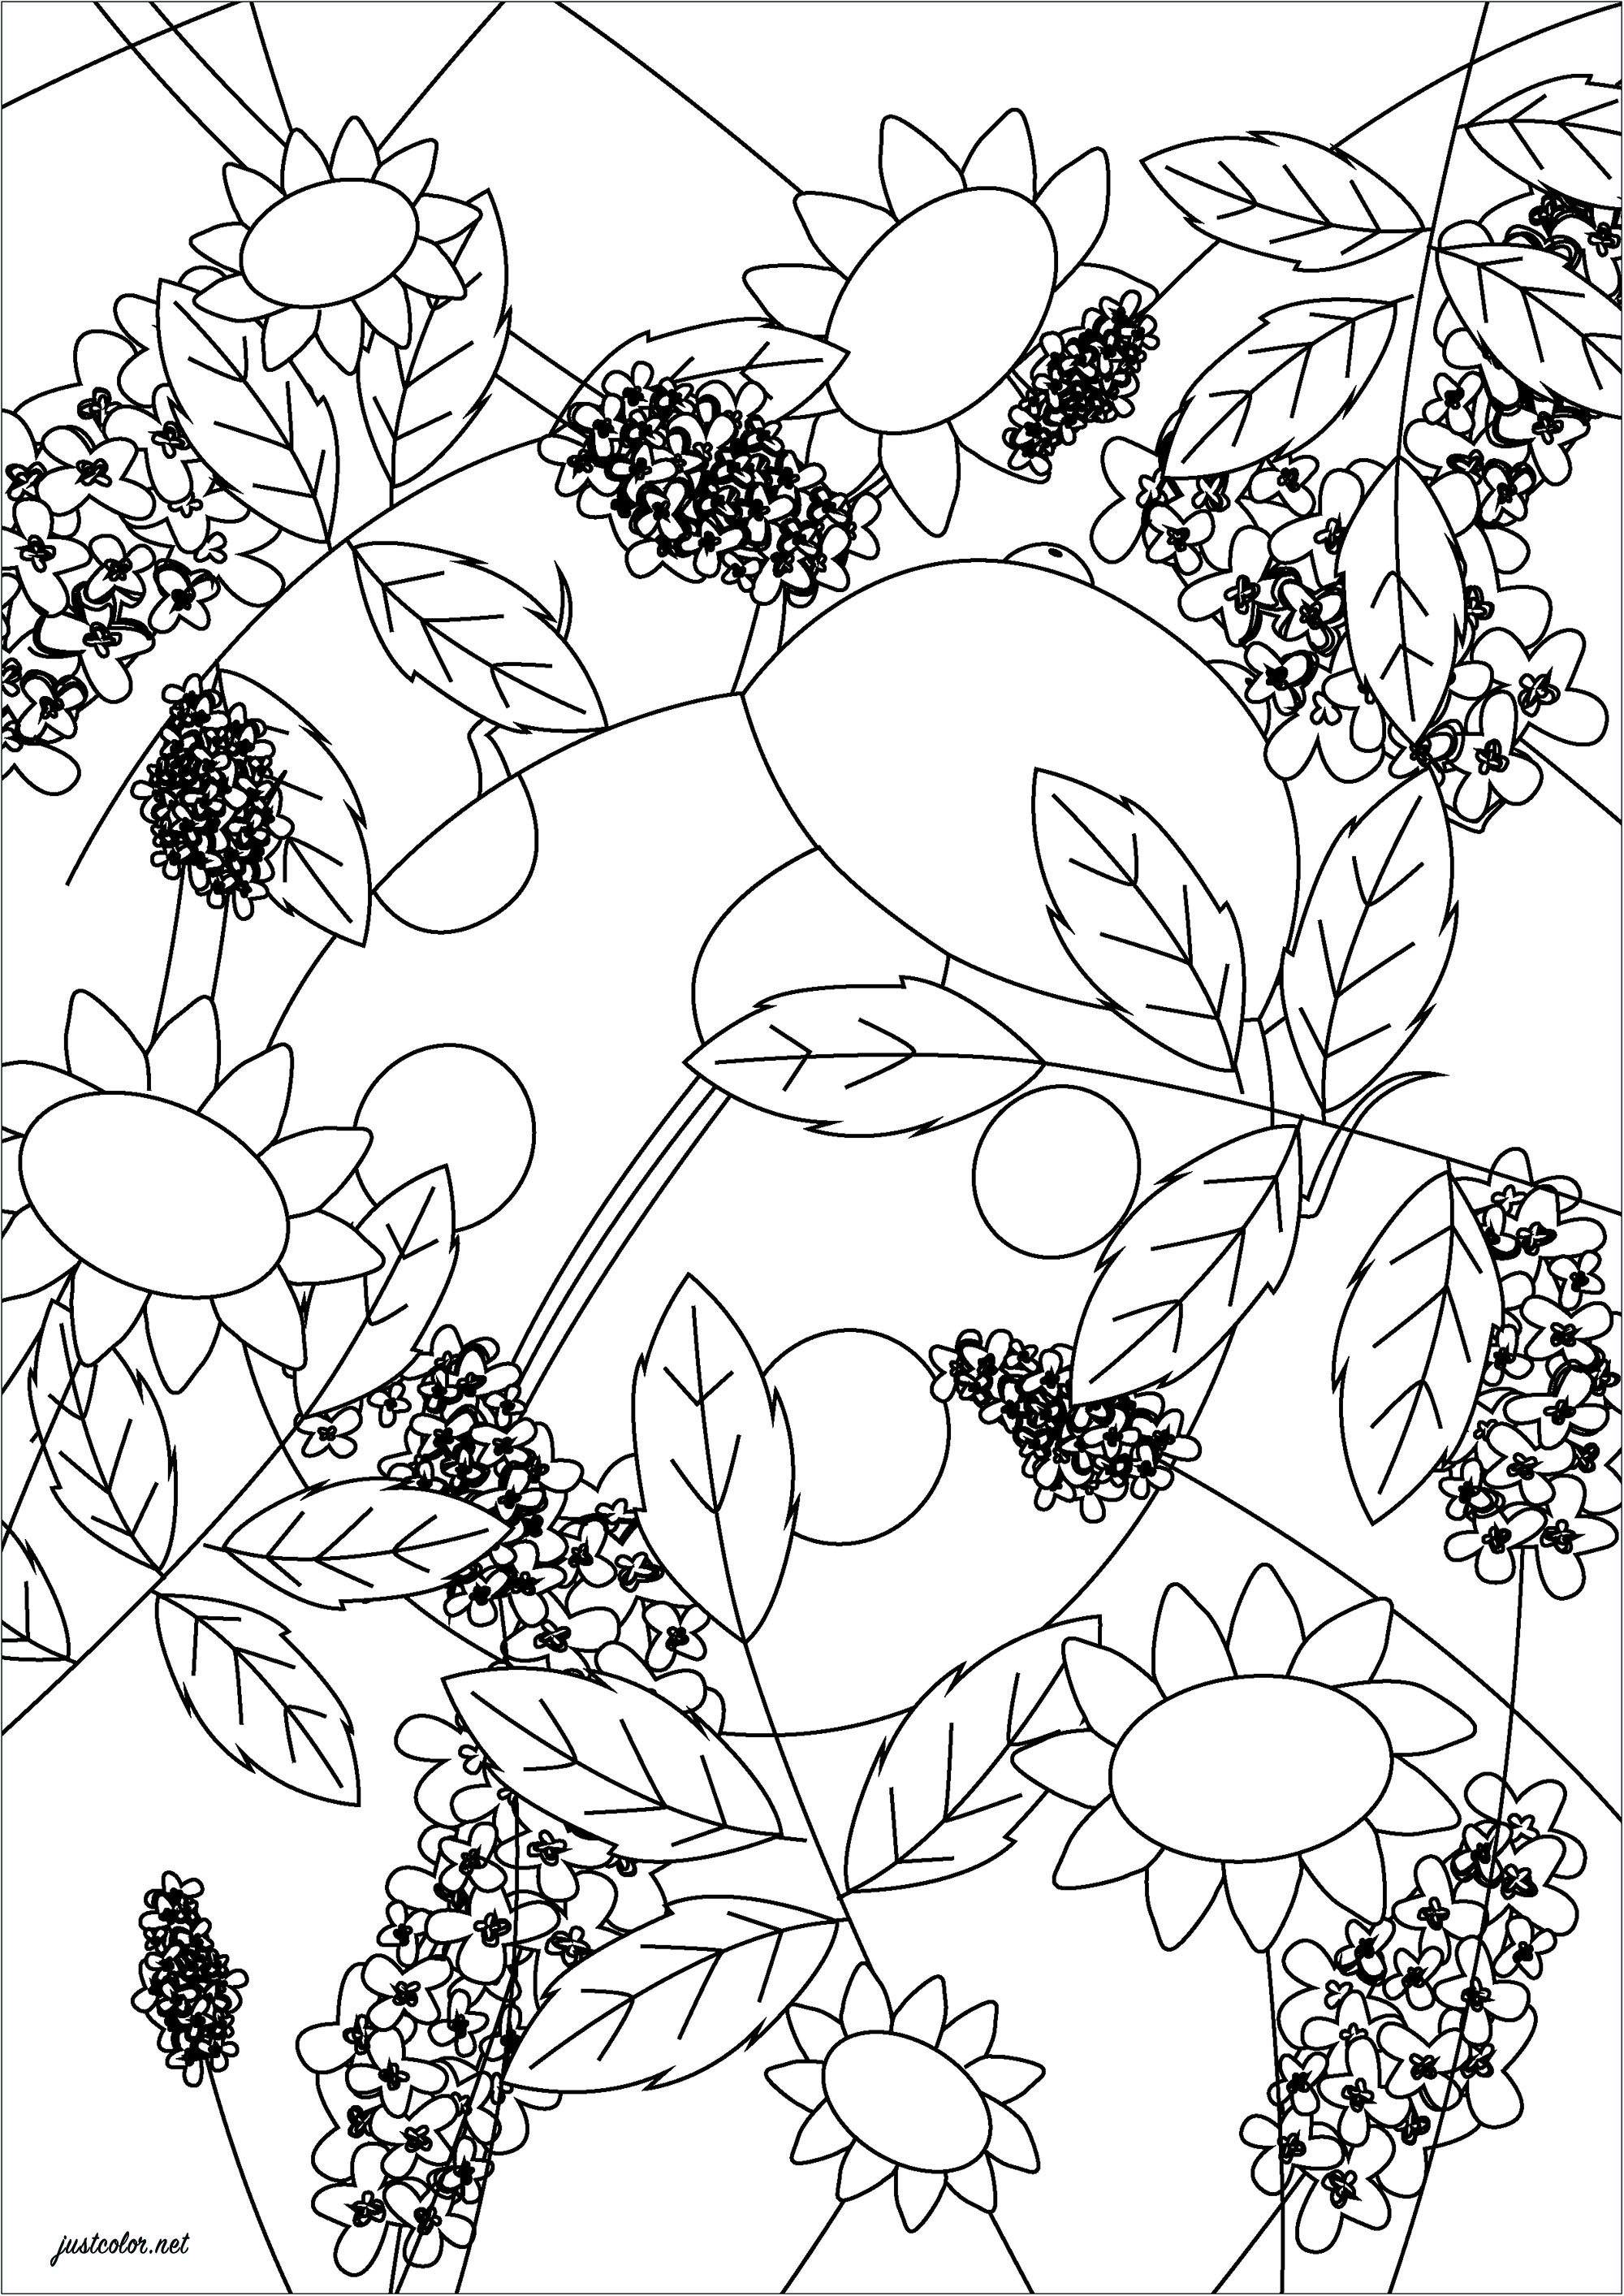 Coloring page of leaves. With beautiful shades of green, these leaves will be even prettier, Artist : Gaelle Picard